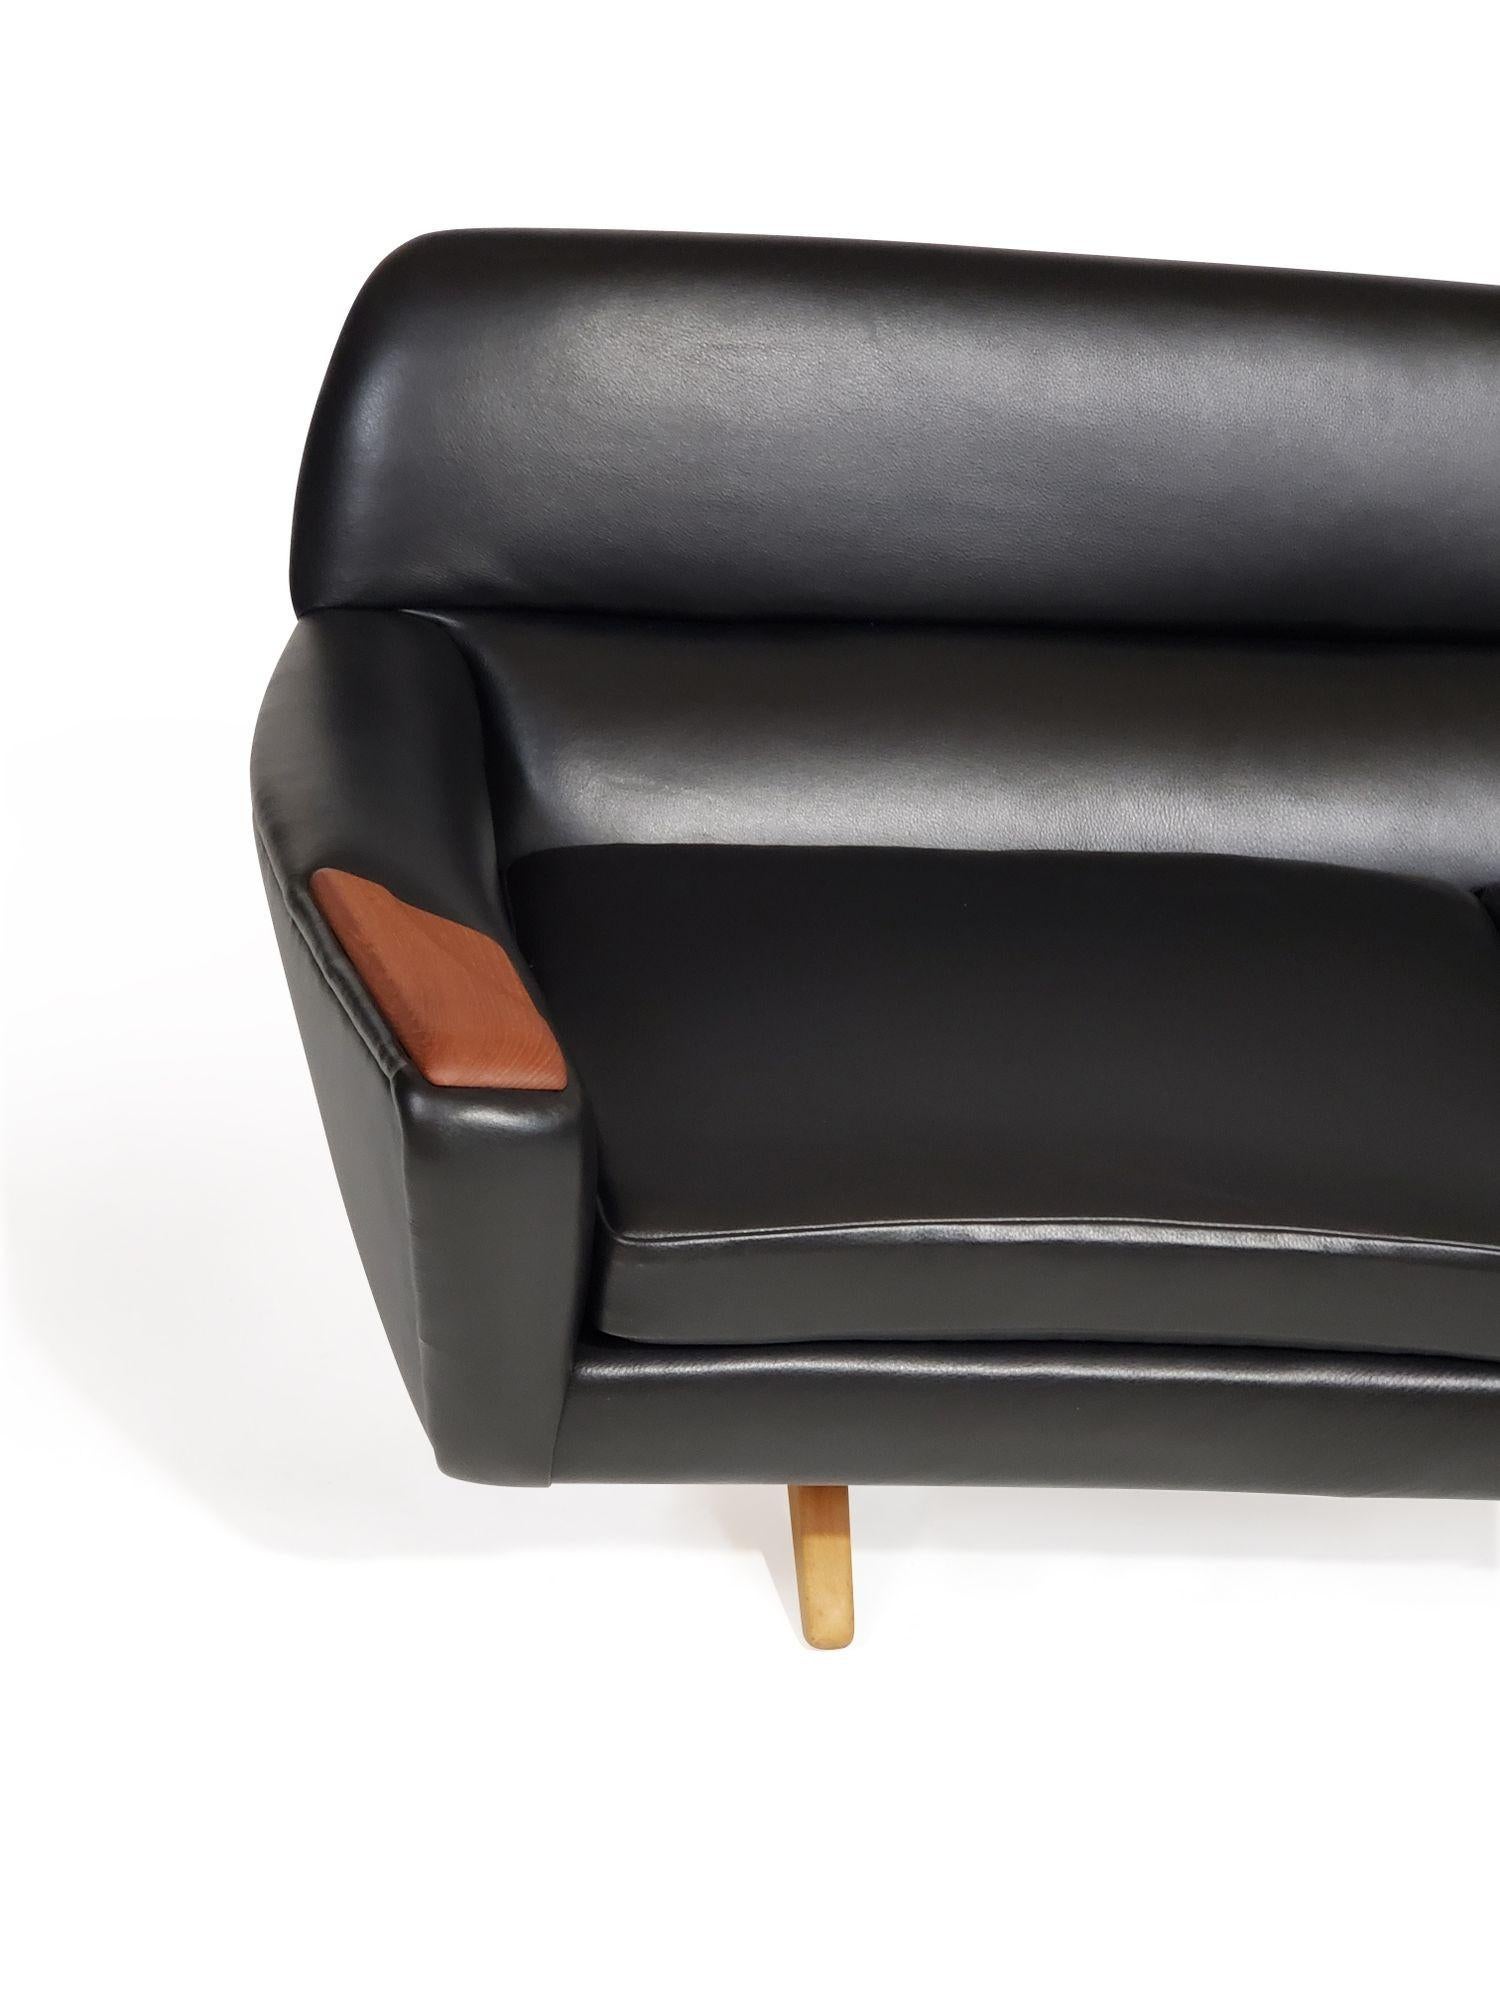 Danish sofa designed by Leif Hansen for Kronen. Crafted of a solid wood frame in a curved form with teak paws, perfectly reupholstered in a full-grain semi-aniline soft black leather. Raised on beech scissor legs. Professionally restored by our team